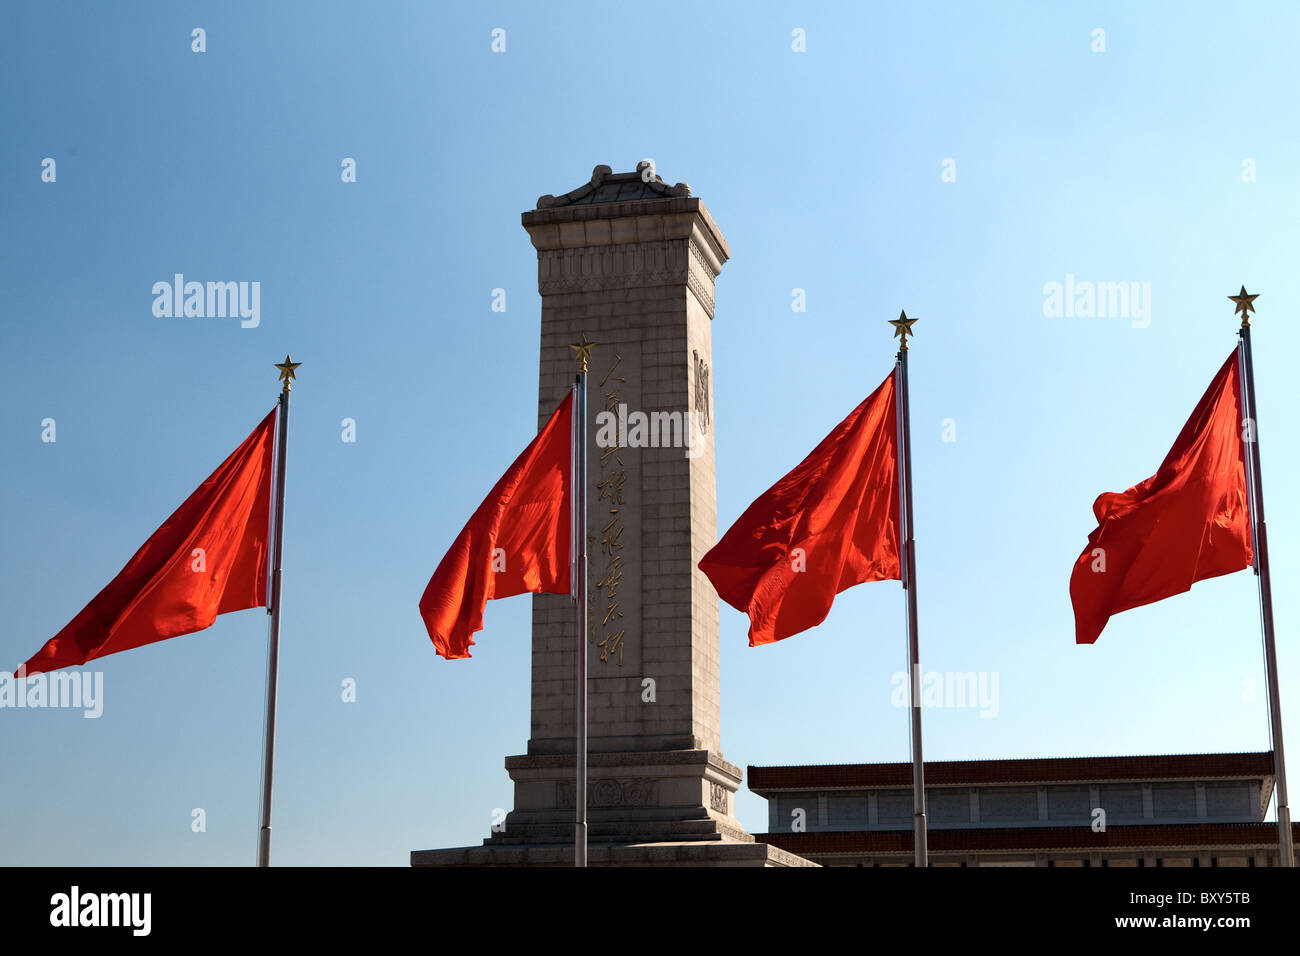 Monument to the People's Heroes, Tiananmen Square, Beijing, China Stock Photo